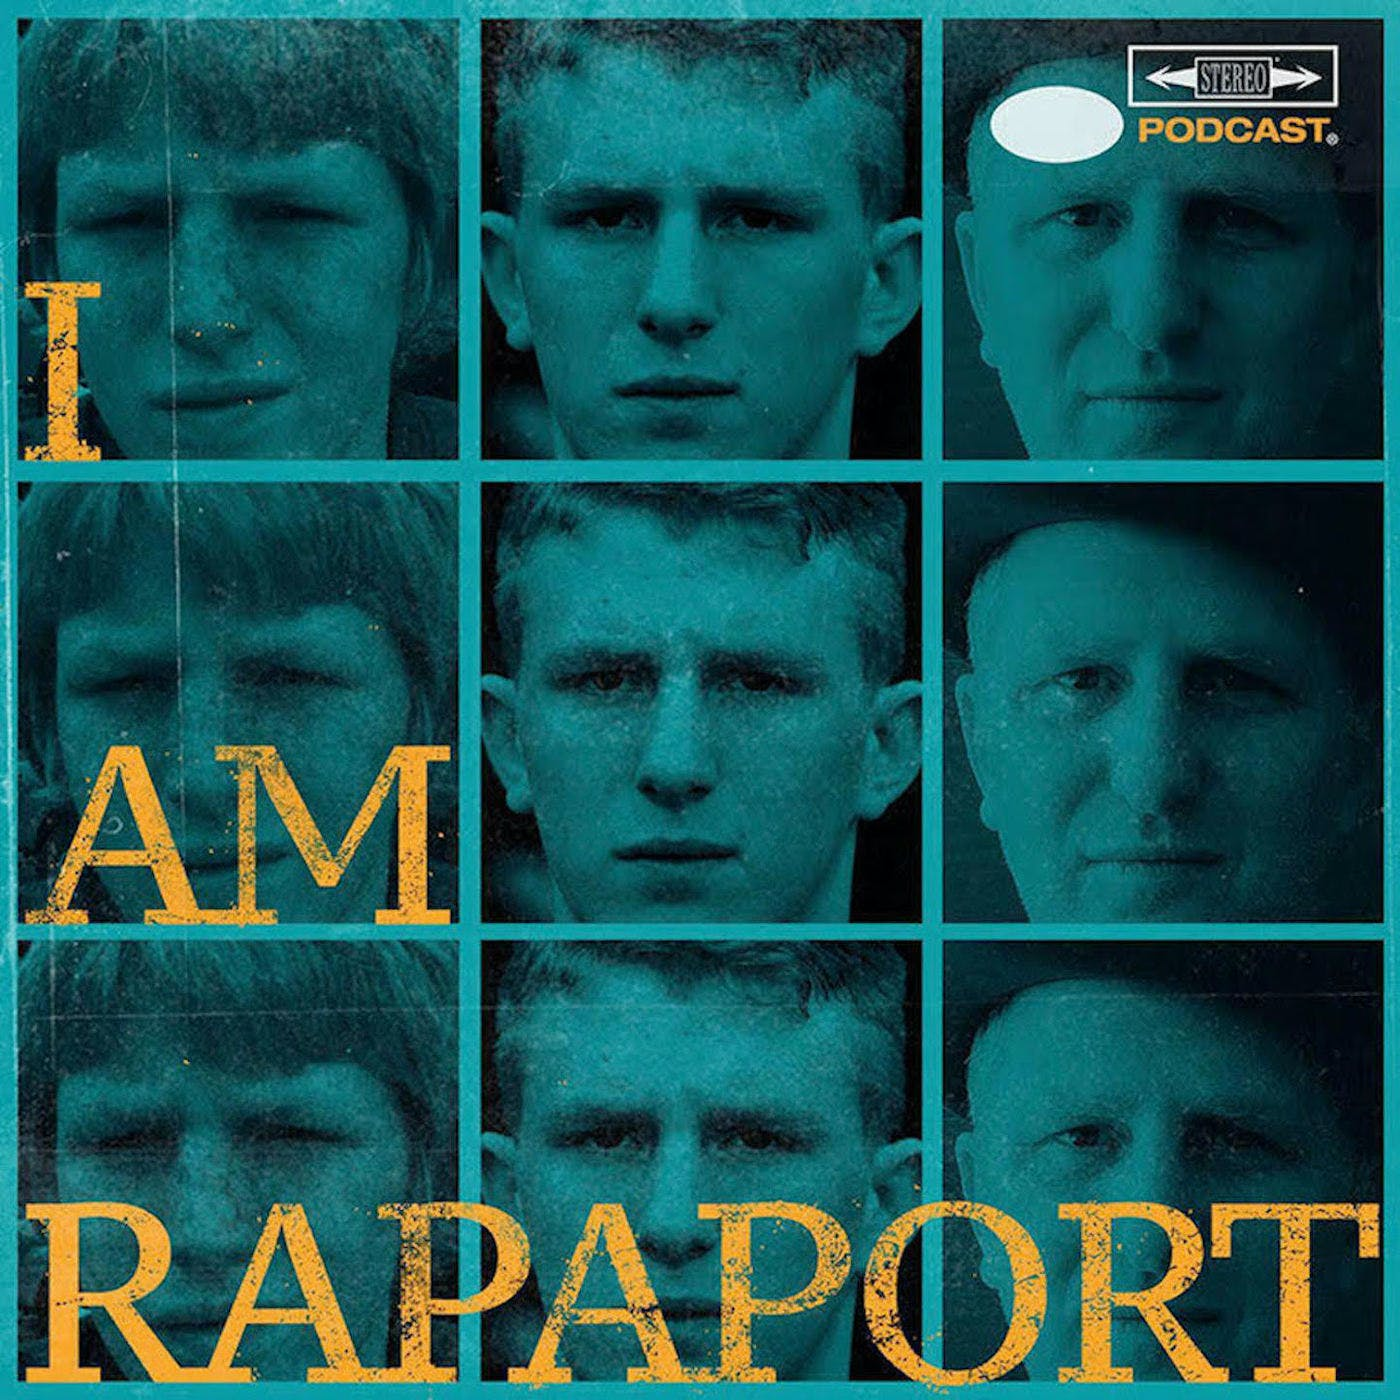 EP 308 - HISTORY AT BIG 3 BARCLAYS/1ST ANNUAL I AM RAPAPORT NBA AWARDS/MCENROE ON SERENA/SICK F*CKS OF THE WEEK/BILL COSBY GETS OFF/BALL-LESS SOCCER